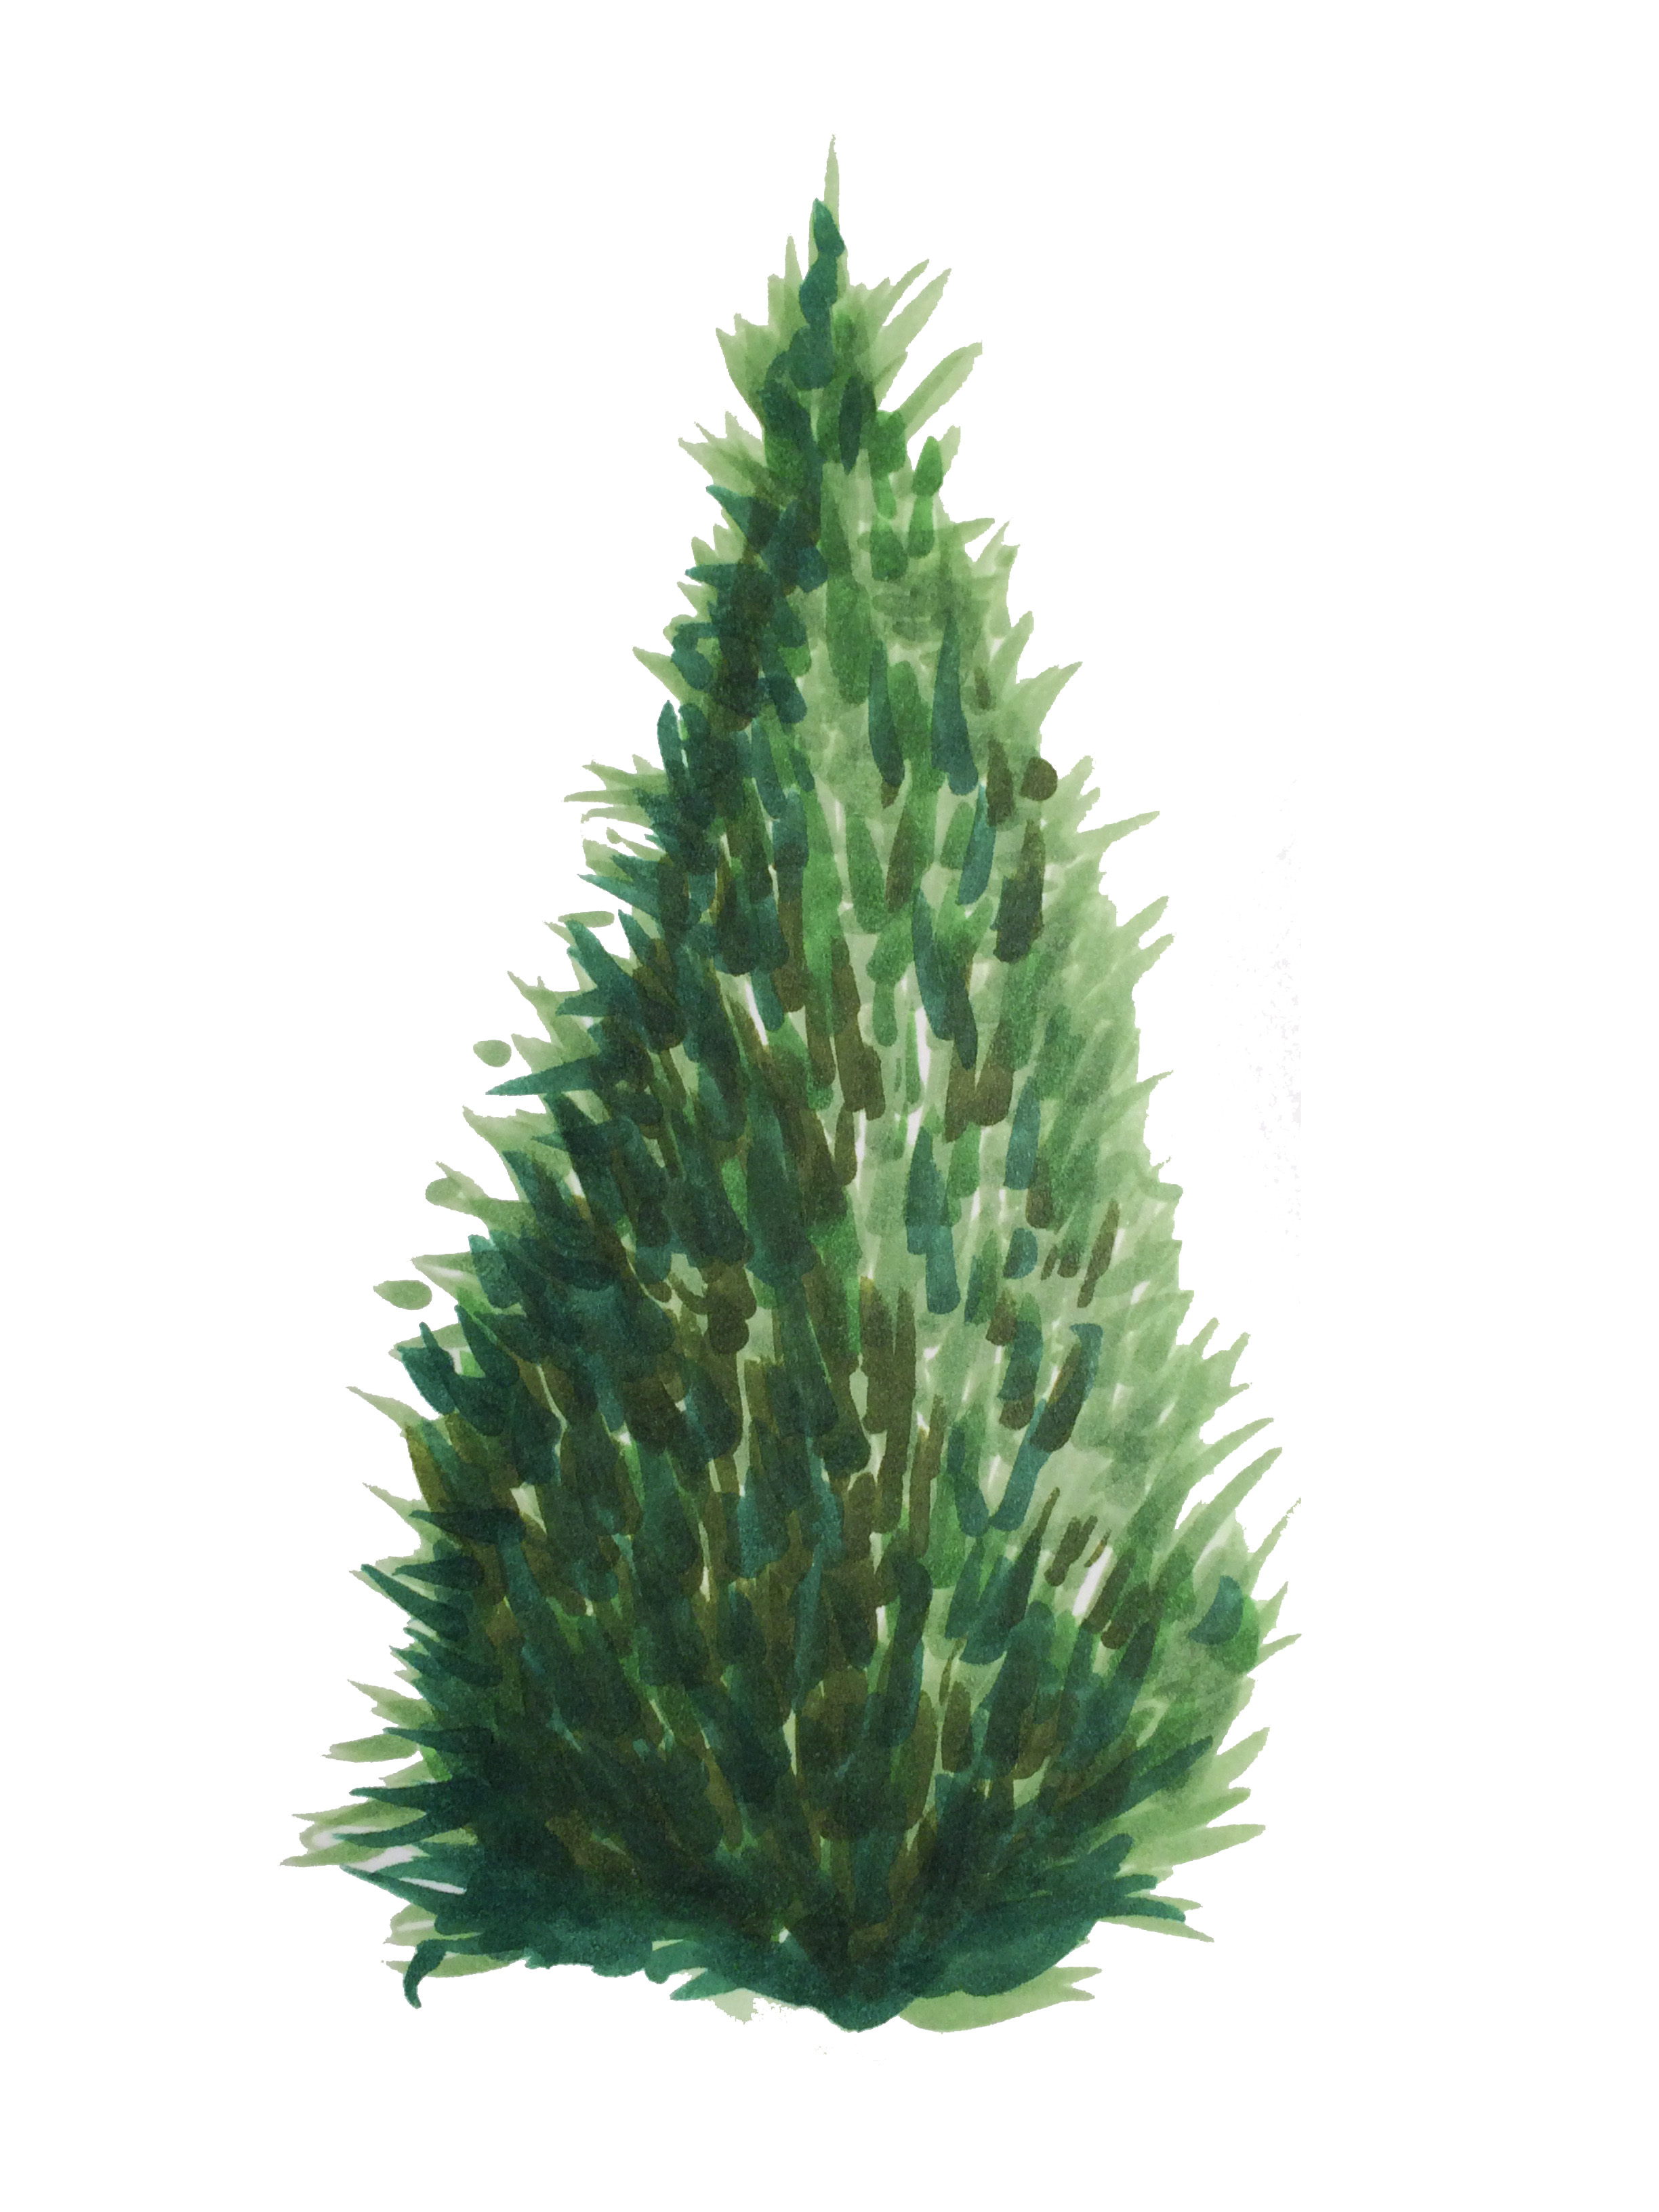 Simple Pine Tree Drawing at GetDrawings.com | Free for personal use ...